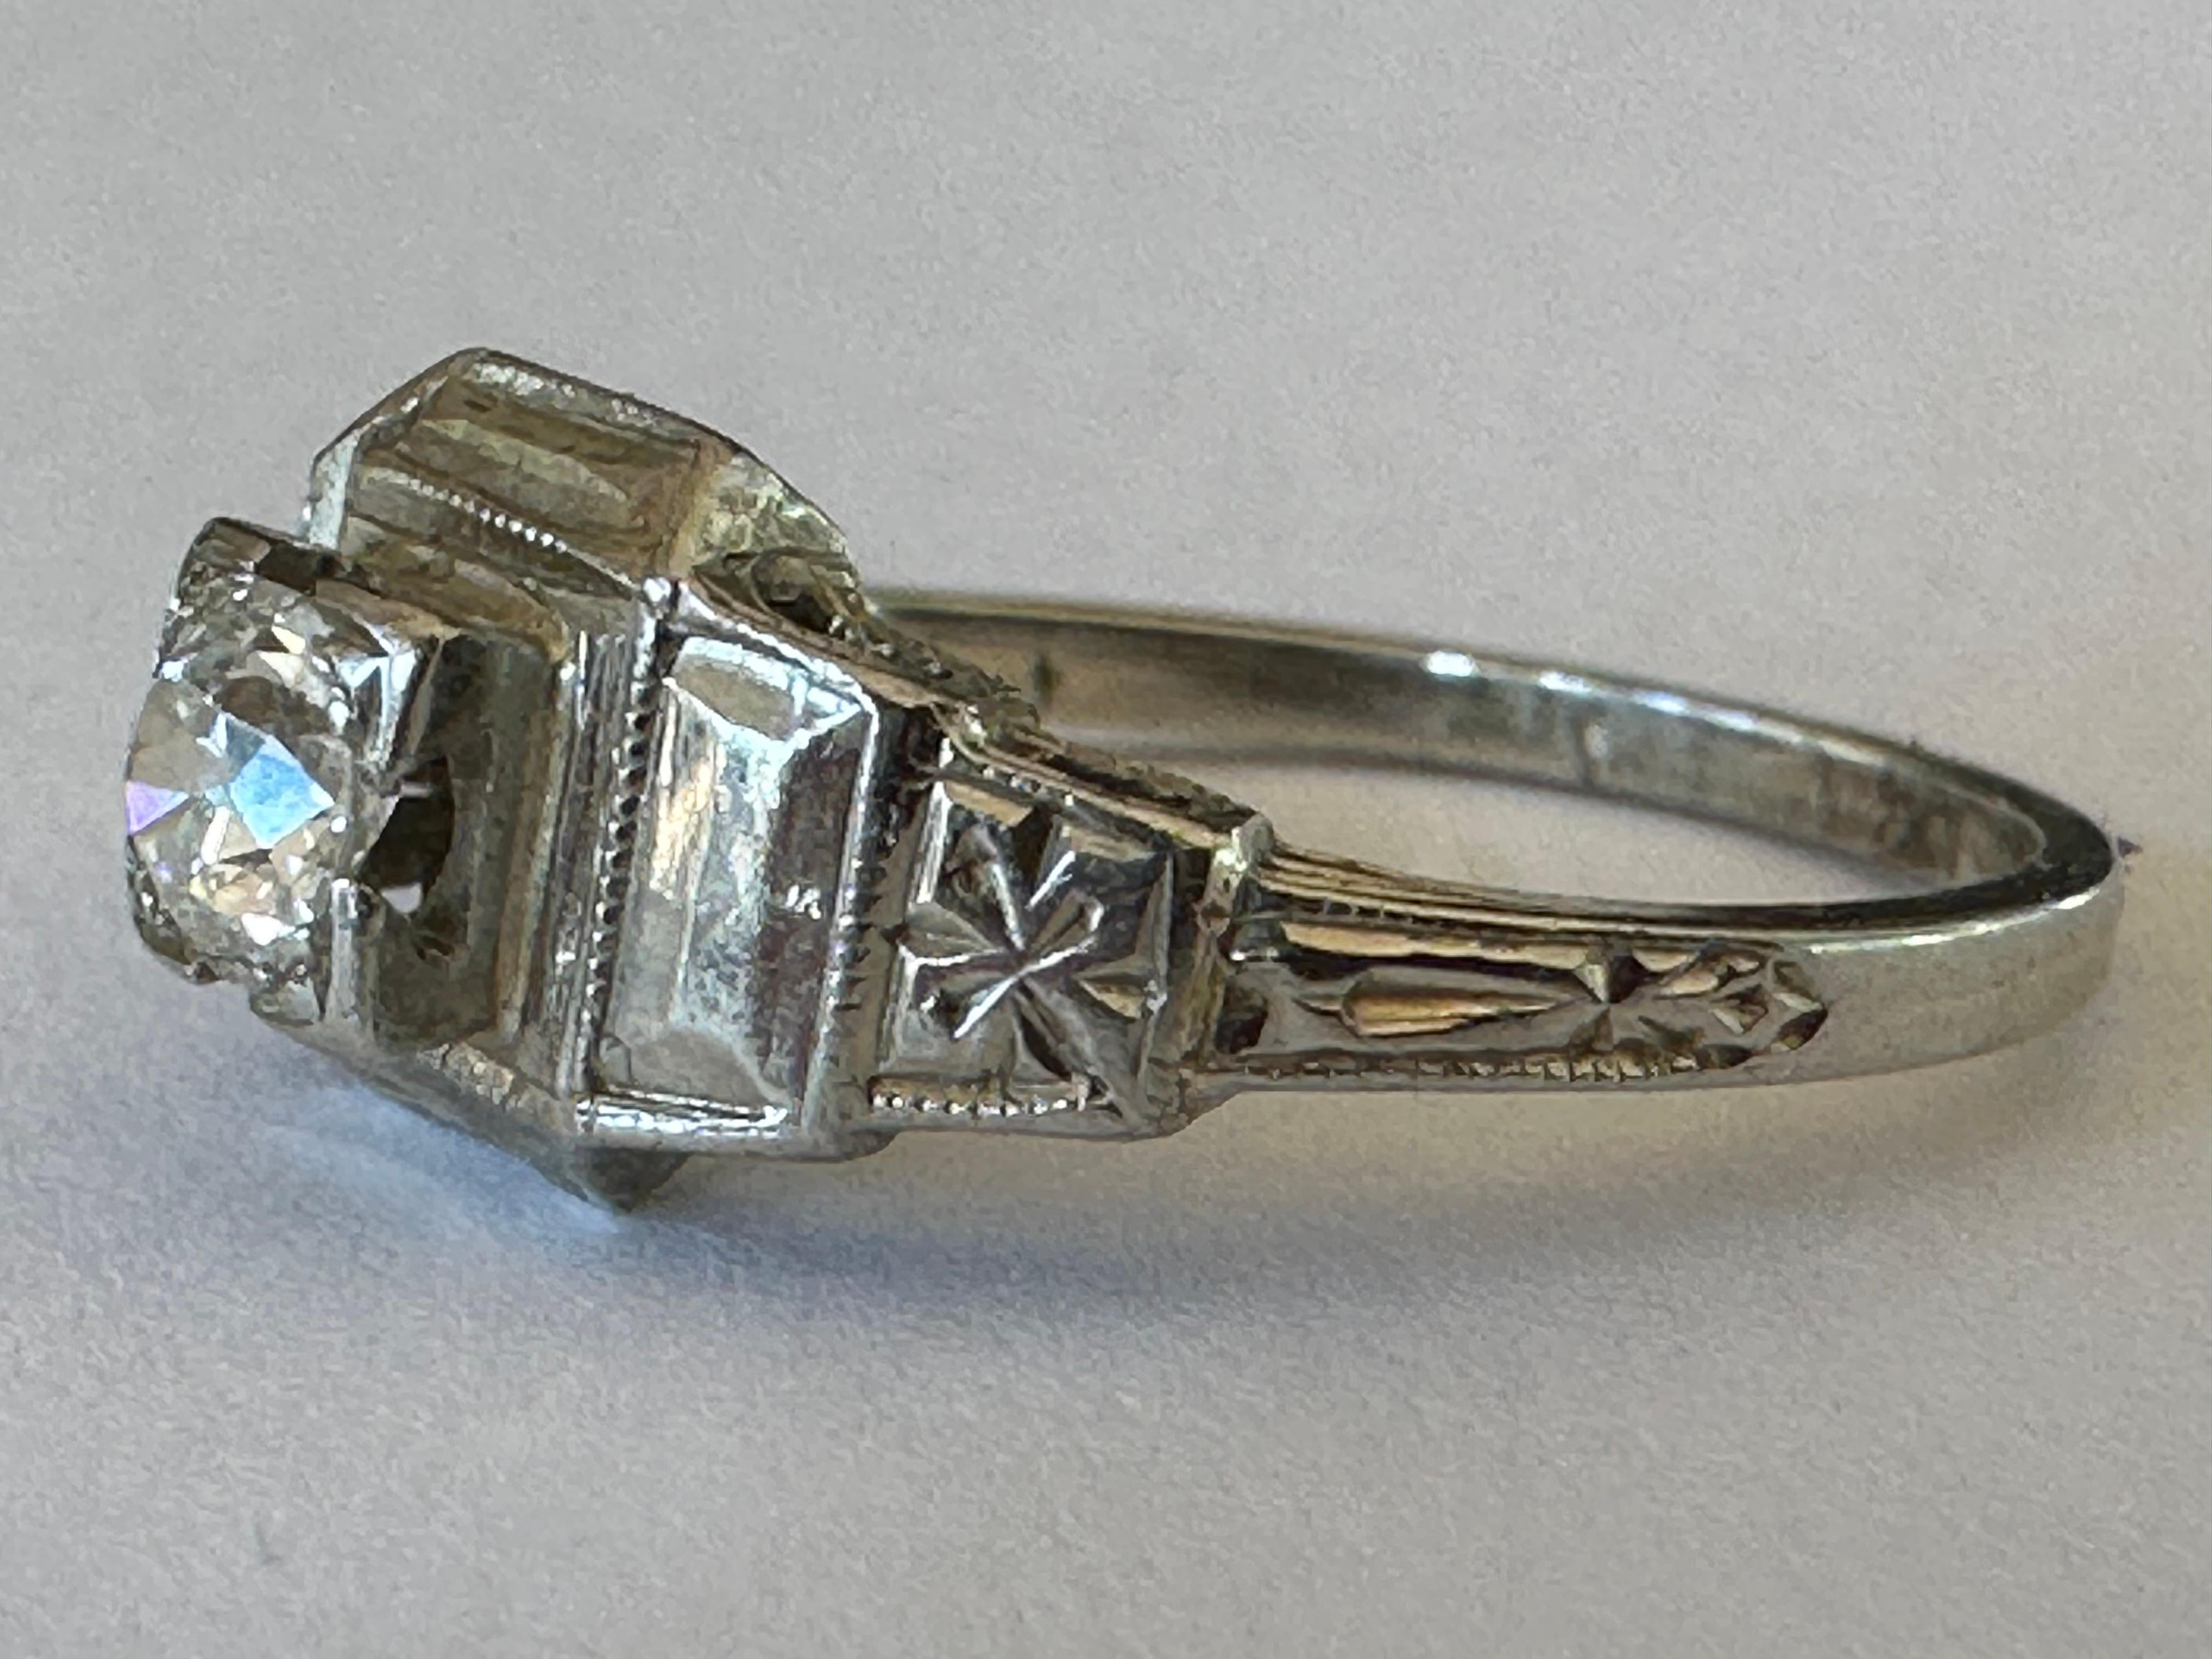 An approximately 0.30-carat Old European cut diamond centers this antique Art Deco ring, IJ color, VS clarity, complemented with hand-engraved shoulders and fine millegrain edging. Handcrafted in 18K white gold. 